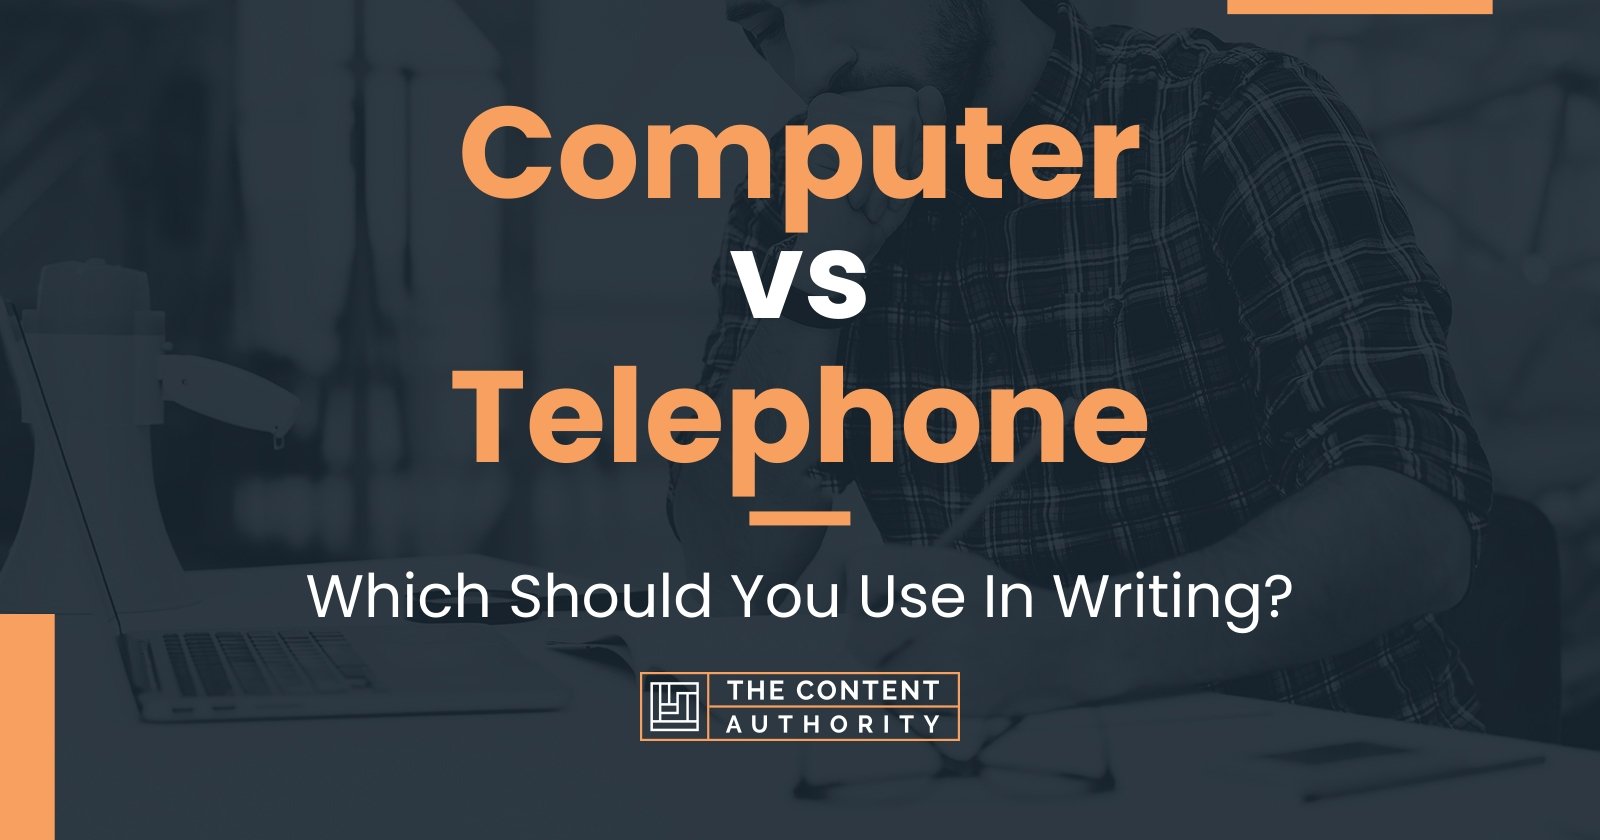 Computer vs Telephone: Which Should You Use In Writing?